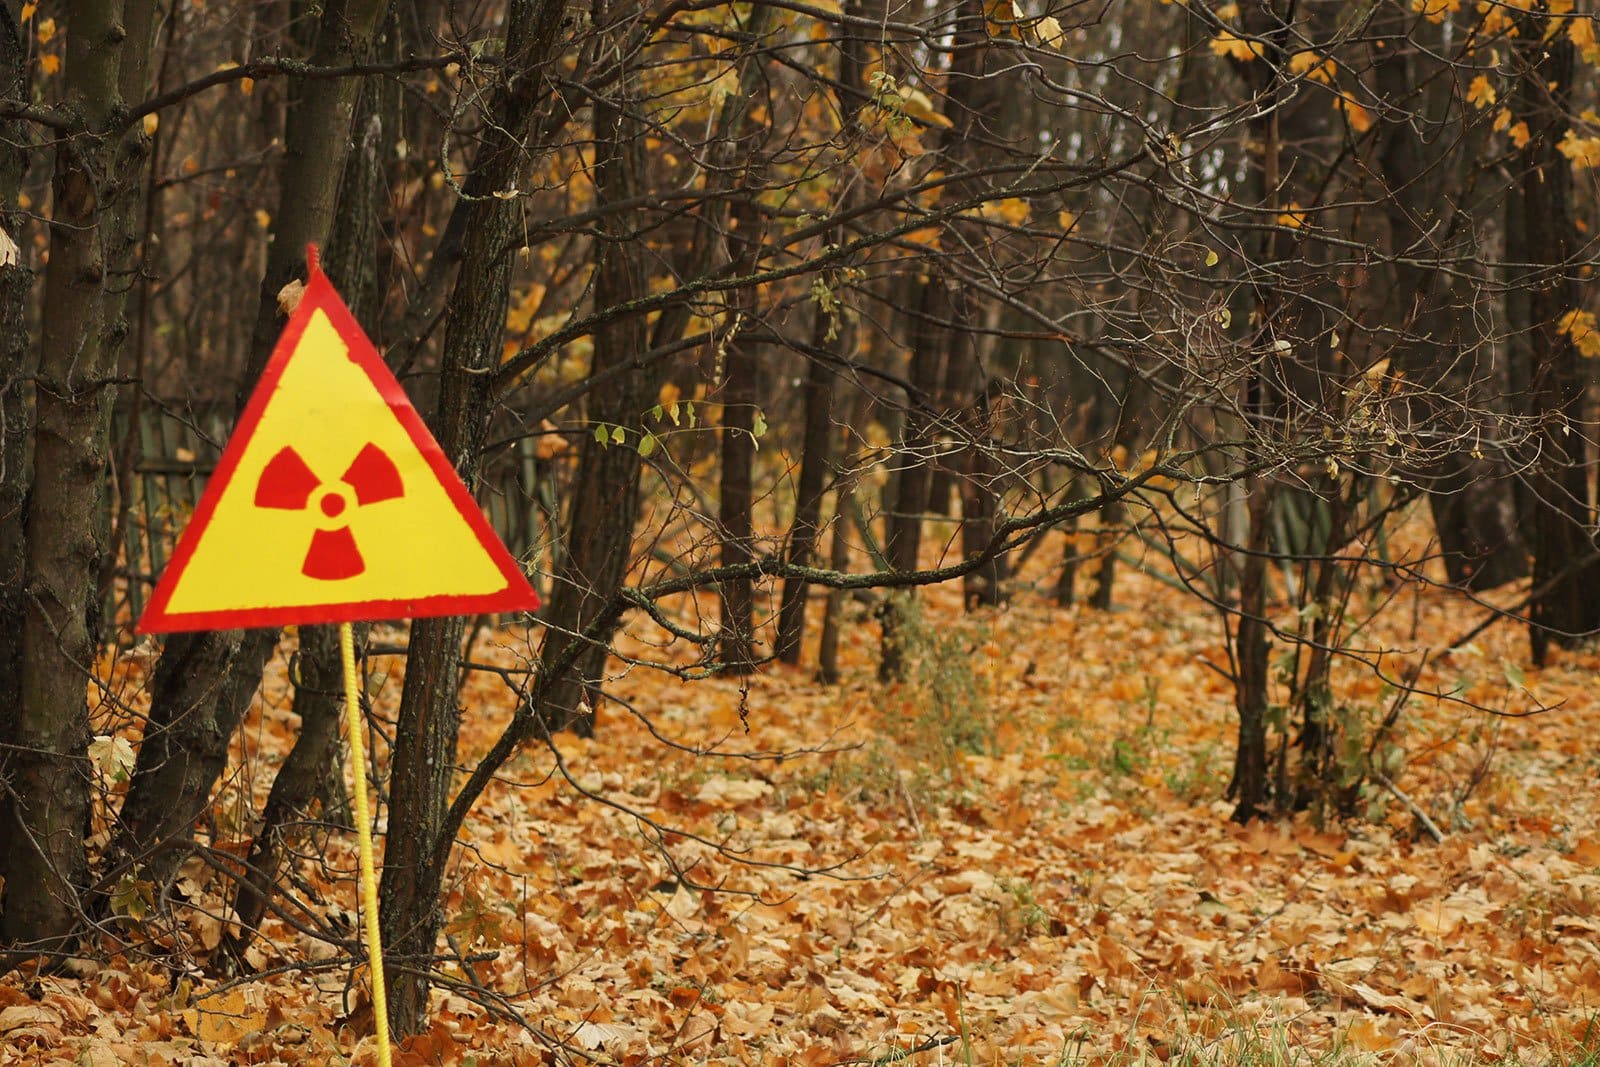 The Russian military disturbed radioactive dust in the highly toxic Red Forest in Chernobyl